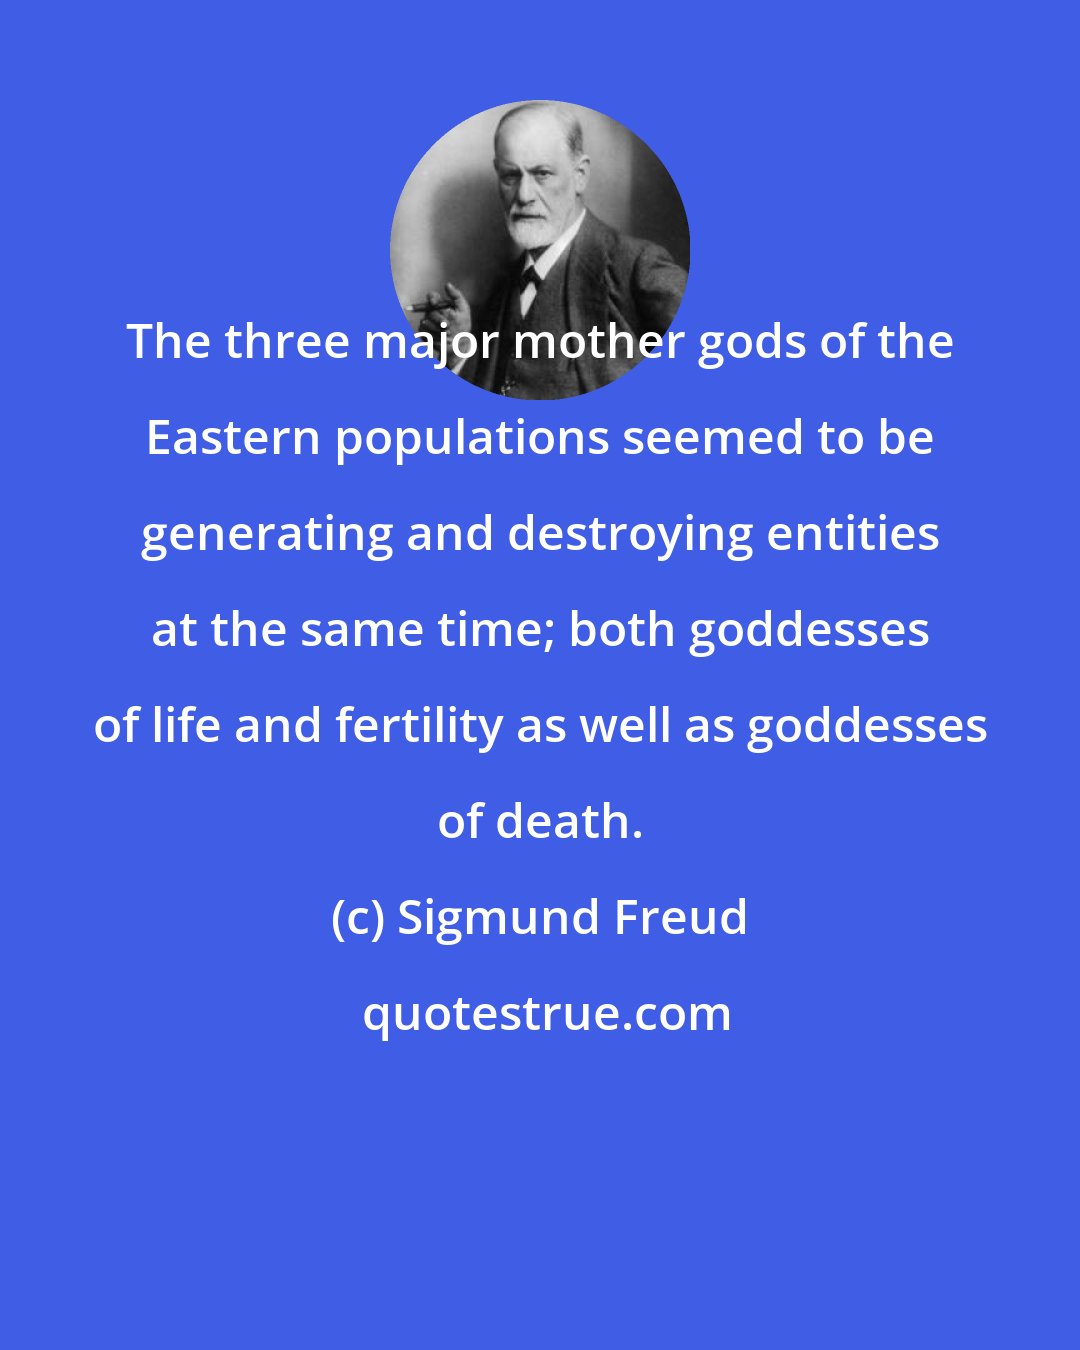 Sigmund Freud: The three major mother gods of the Eastern populations seemed to be generating and destroying entities at the same time; both goddesses of life and fertility as well as goddesses of death.